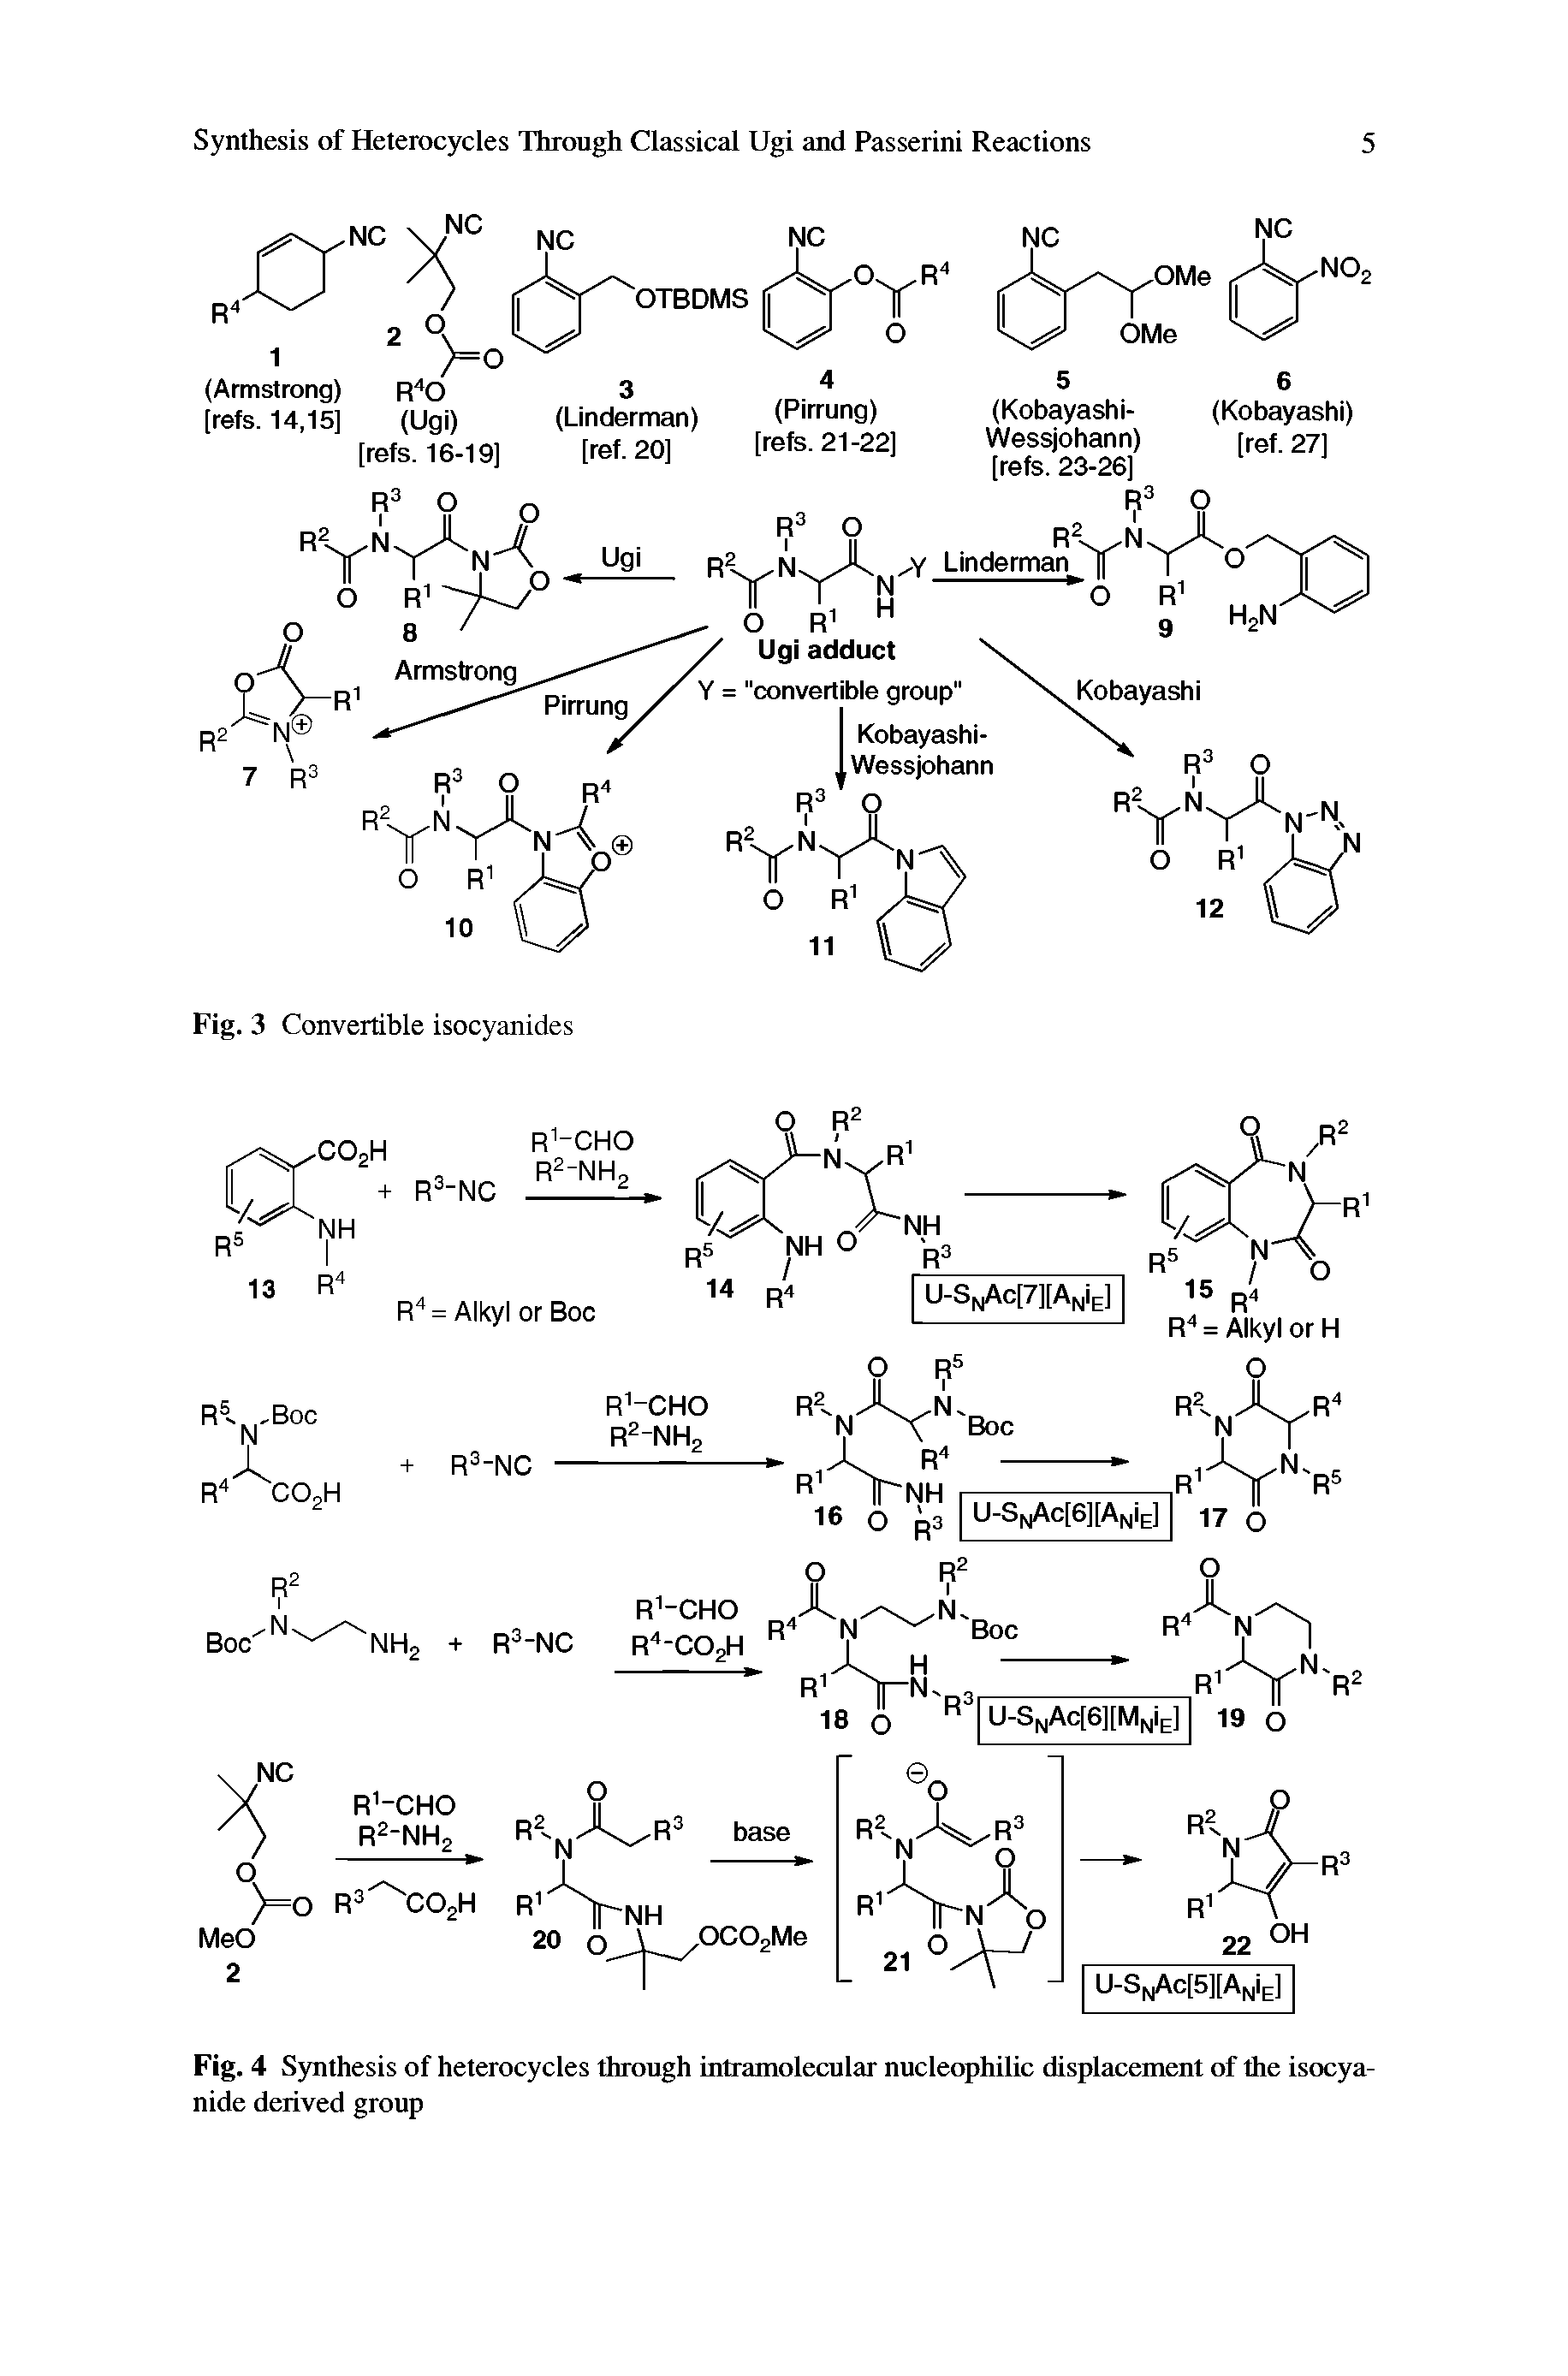 Fig. 4 Synthesis of heterocycles through intramolecular nucleophilic displacement of the isocyanide derived group...